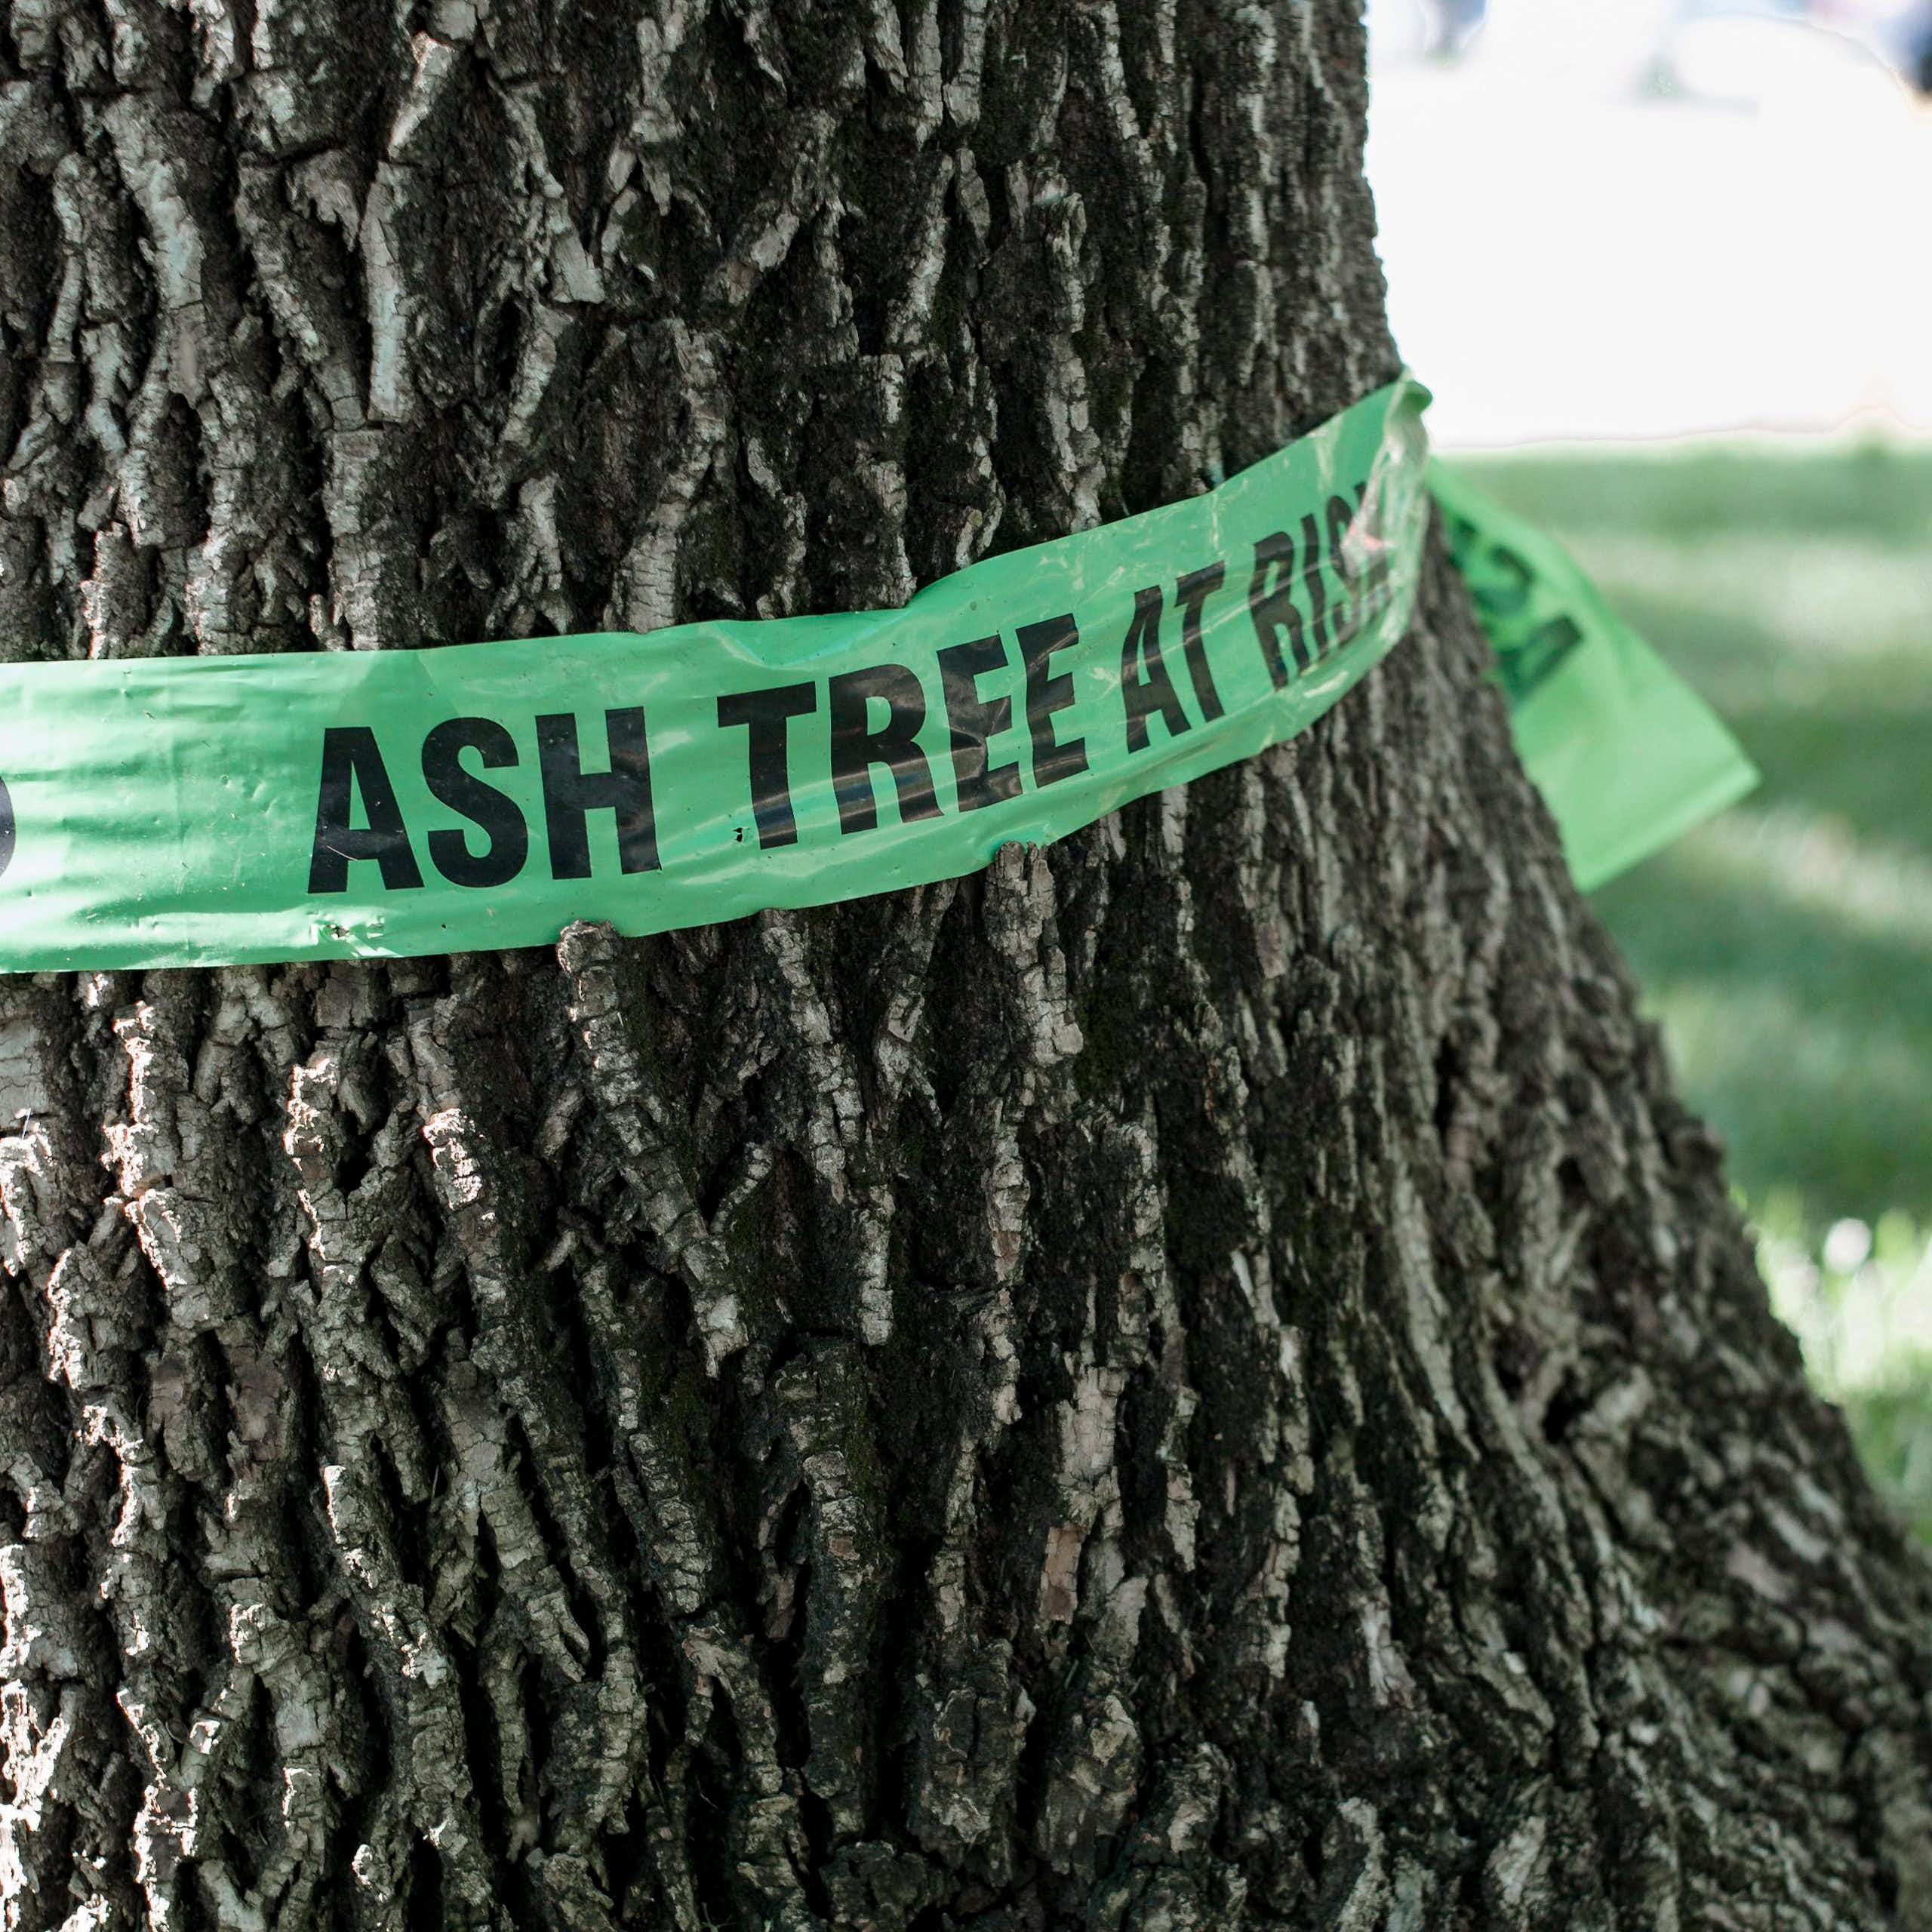 The emerald ash borer has arrived in B.C. — what can we do about it?